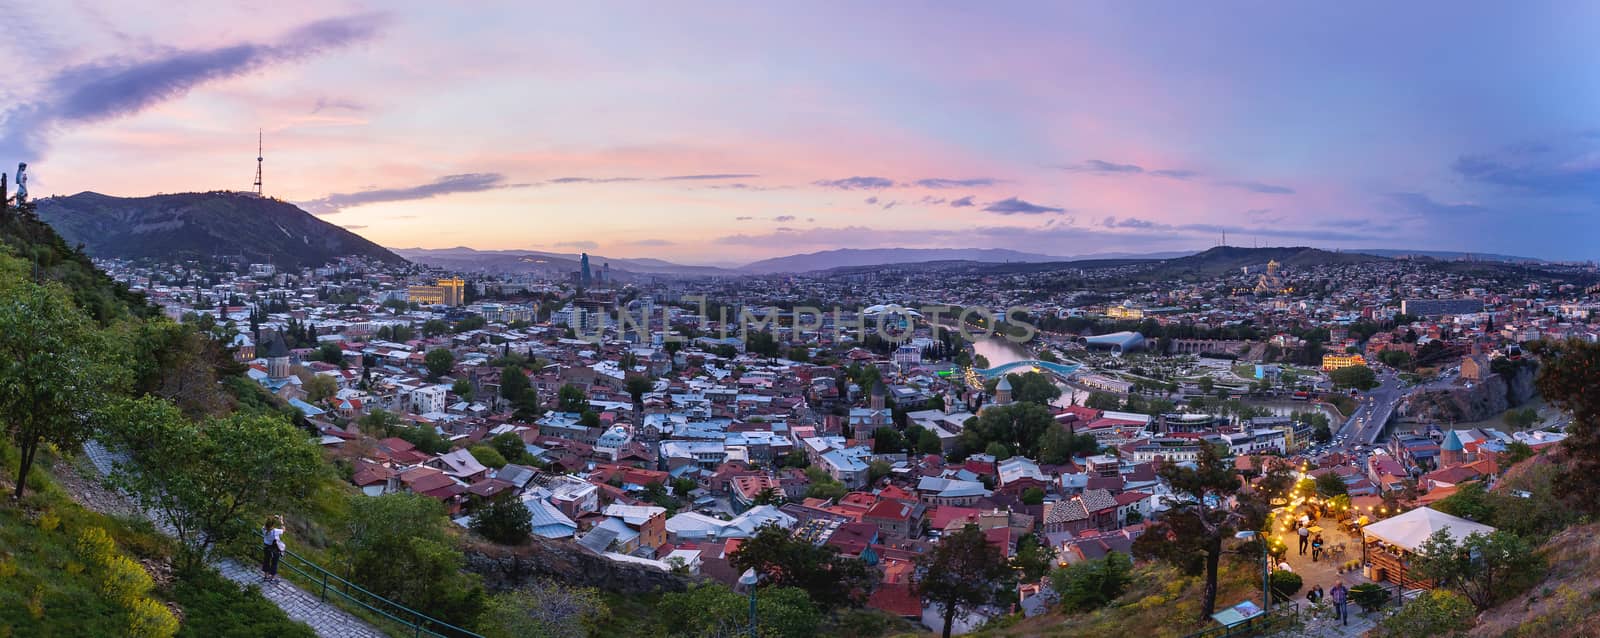 Sunset panorama view of Tbilisi, capital of Georgia country, from Narikala fortress. Famous landmarks - Metekhi church, Holy Trinity Cathedral (Sameba), Presidential Administration, Bridge of Peace with illumination.